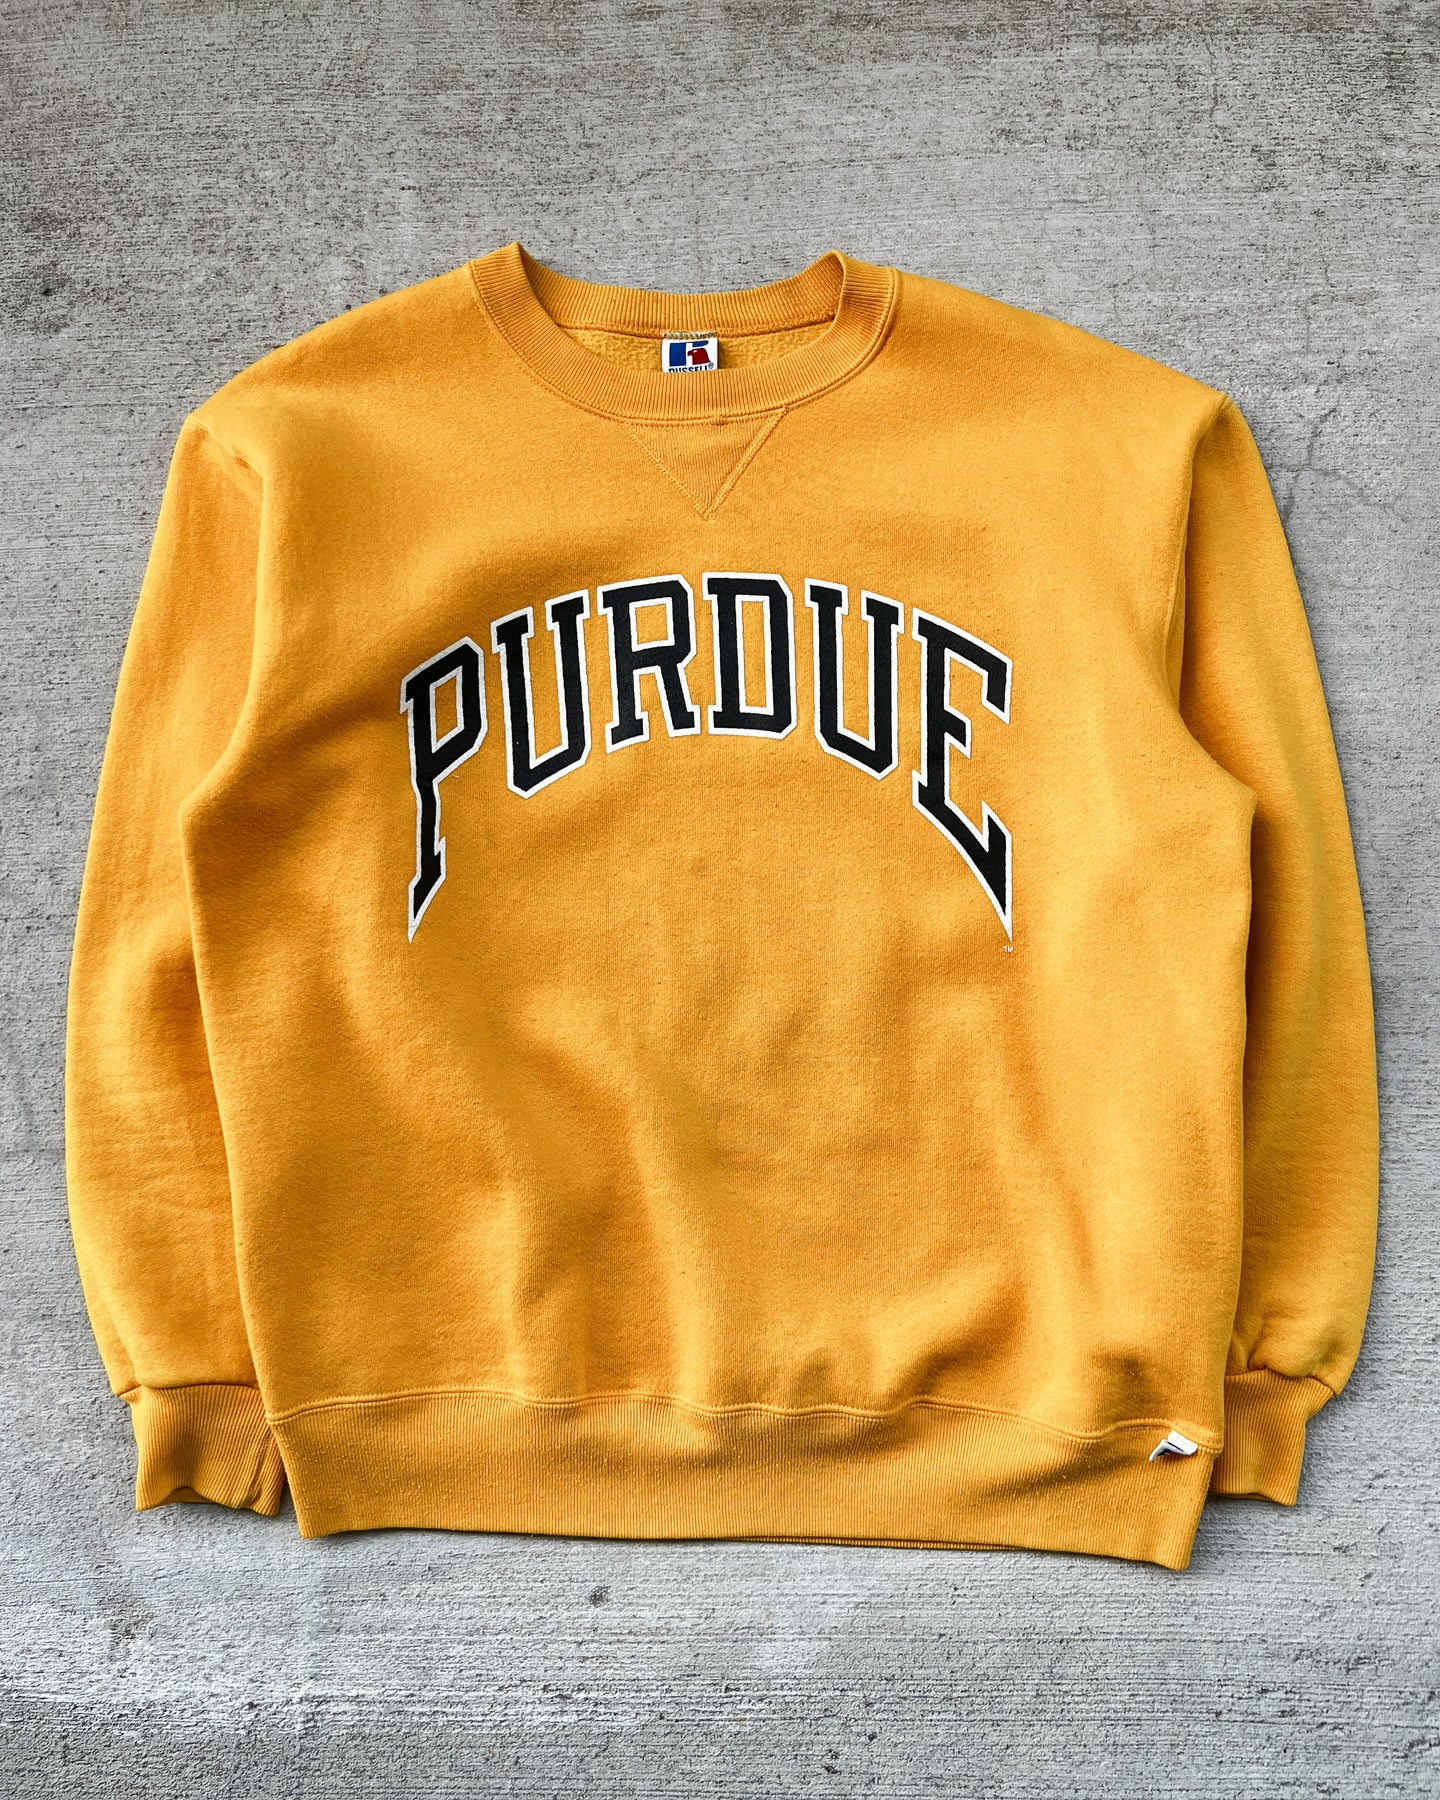 1990s Russell Purdue Gold Crewneck - Size X-Large